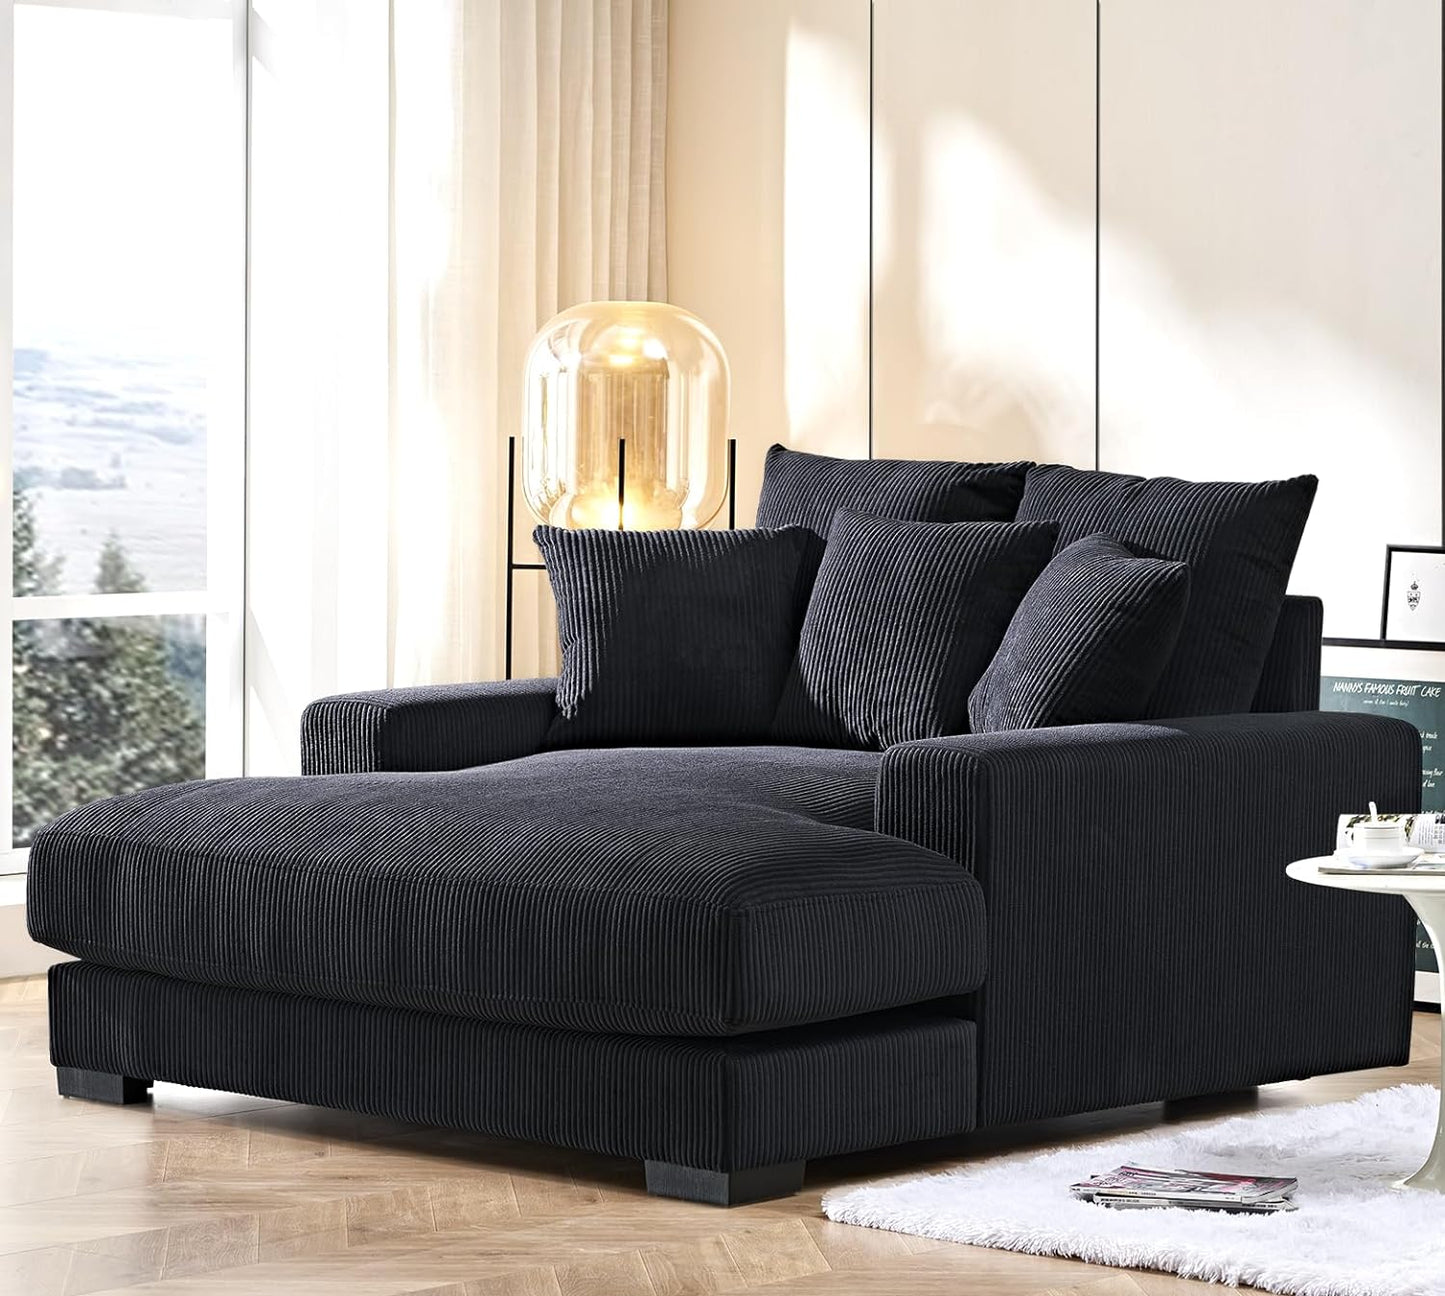 Luxe Upholstered Chaise Lounge Sofa in Soft Corduroy Fabric with Removable Cushions, Oversized Chair for Relaxing in Living Room or Bedroom, 55.1" Wide, Black